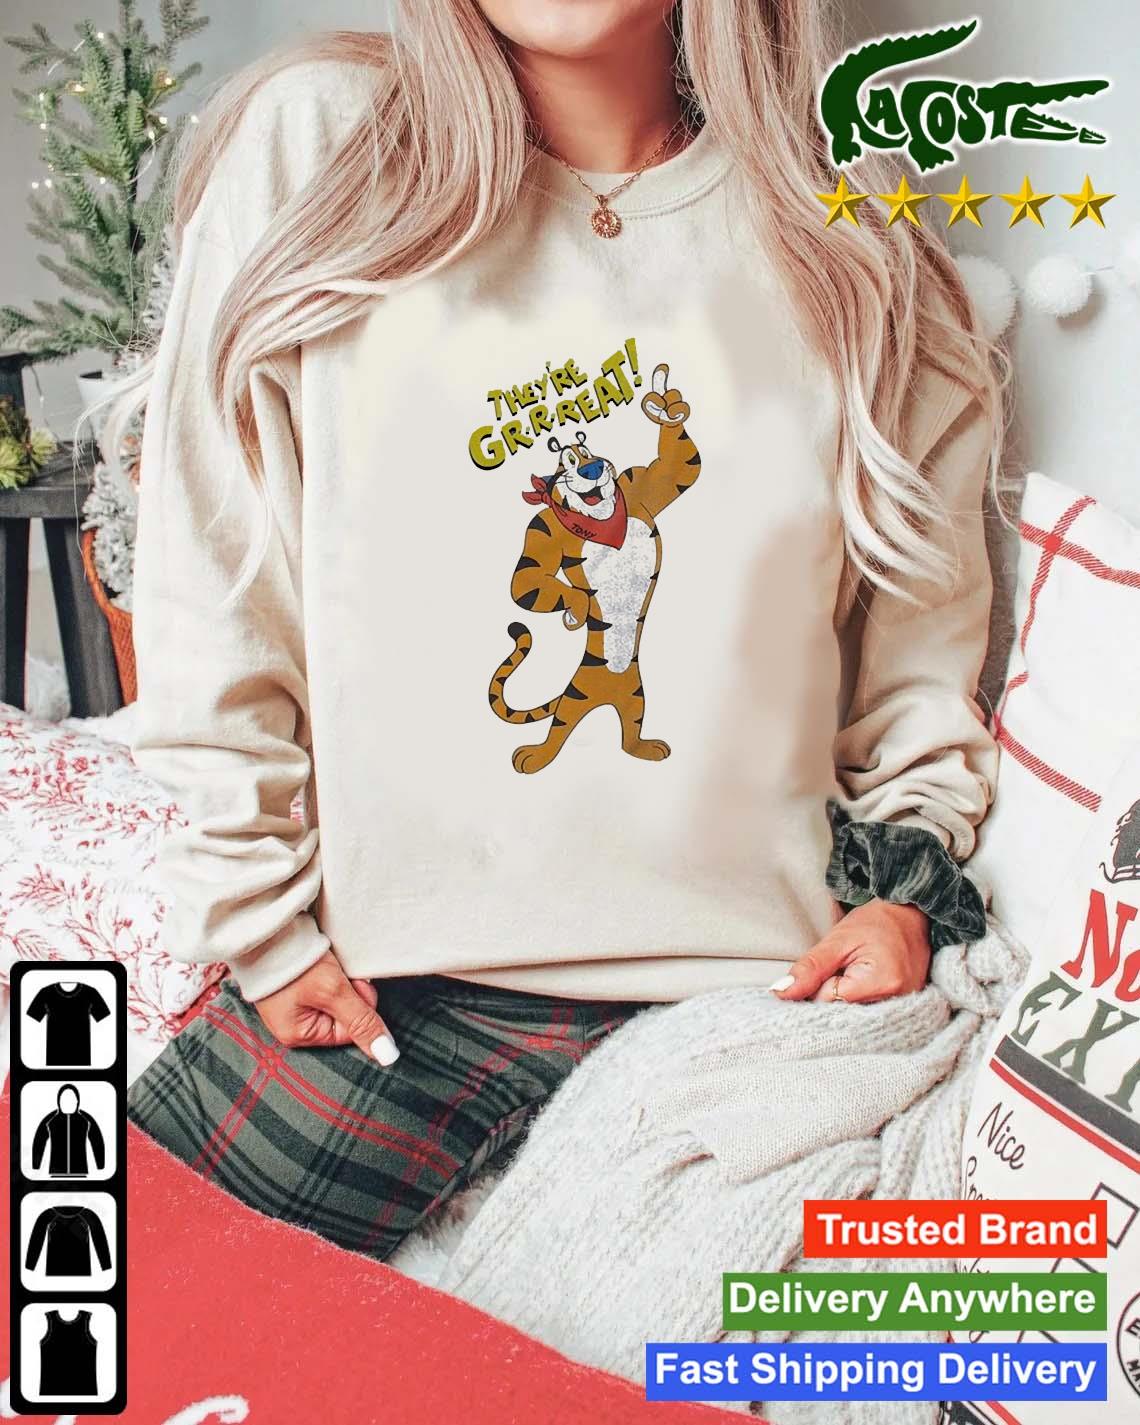 Tony The Tiger They’re Great Frosted Flakes Sweats Mockup Sweater